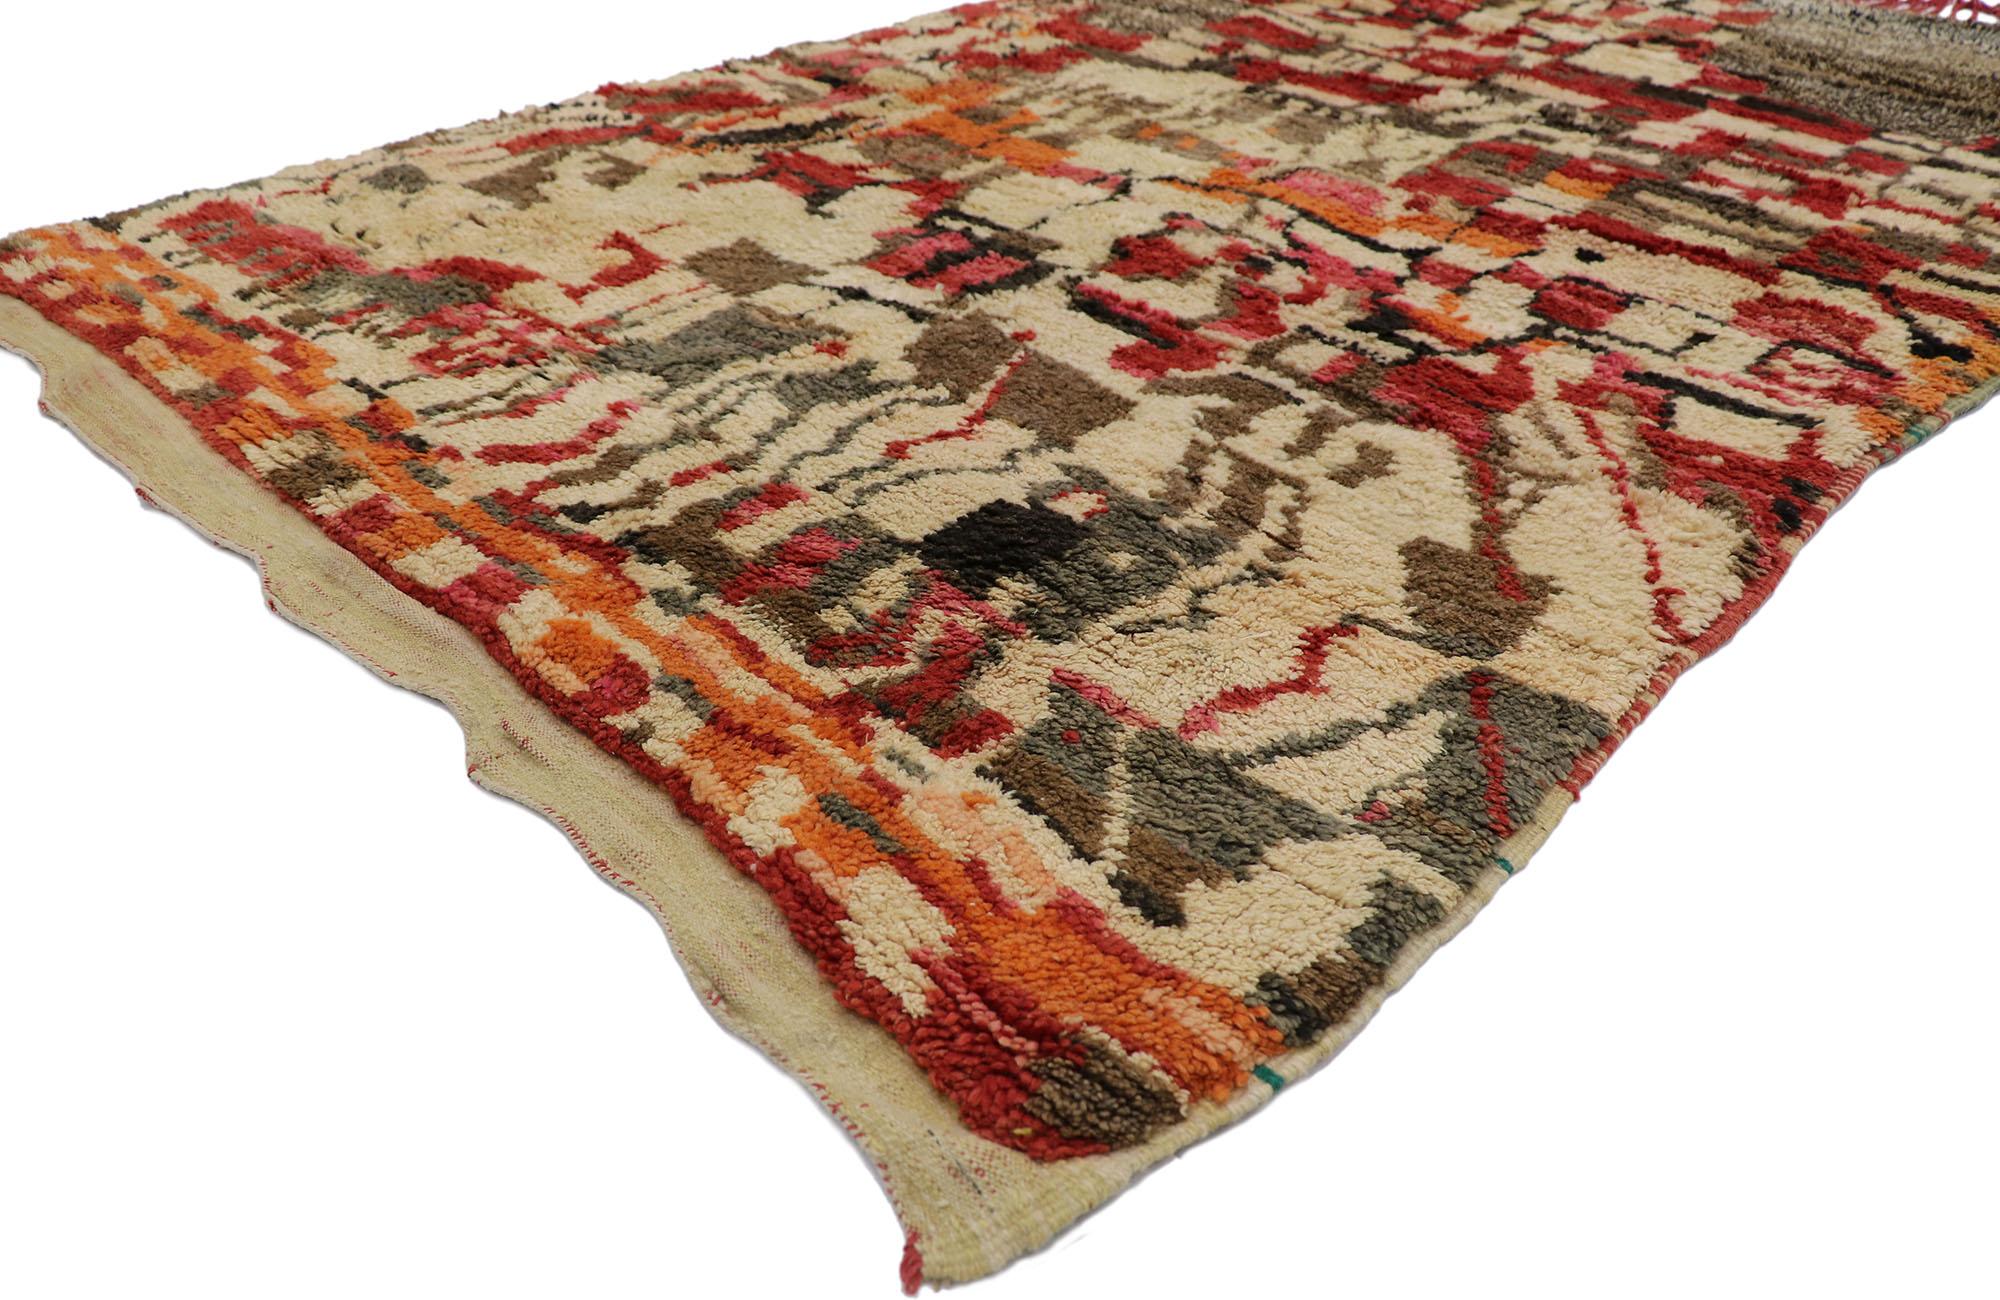 21664 vintage Berber Moroccan rug with Bauhaus style 04'10 x 07'08. Showcasing an abstract expressive design in lively colors, incredible detail and texture, this hand knotted wool vintage Berber Moroccan rug is a captivating vision of woven beauty.